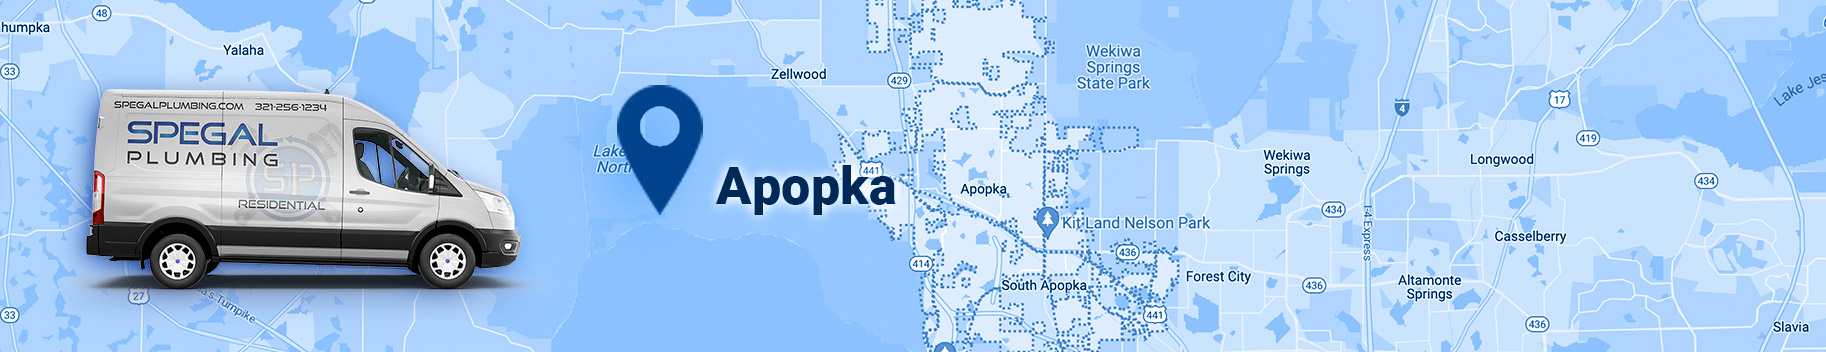 plumber apopka, service car with logo of Spegal Plumbing, and map pointing Apopka location